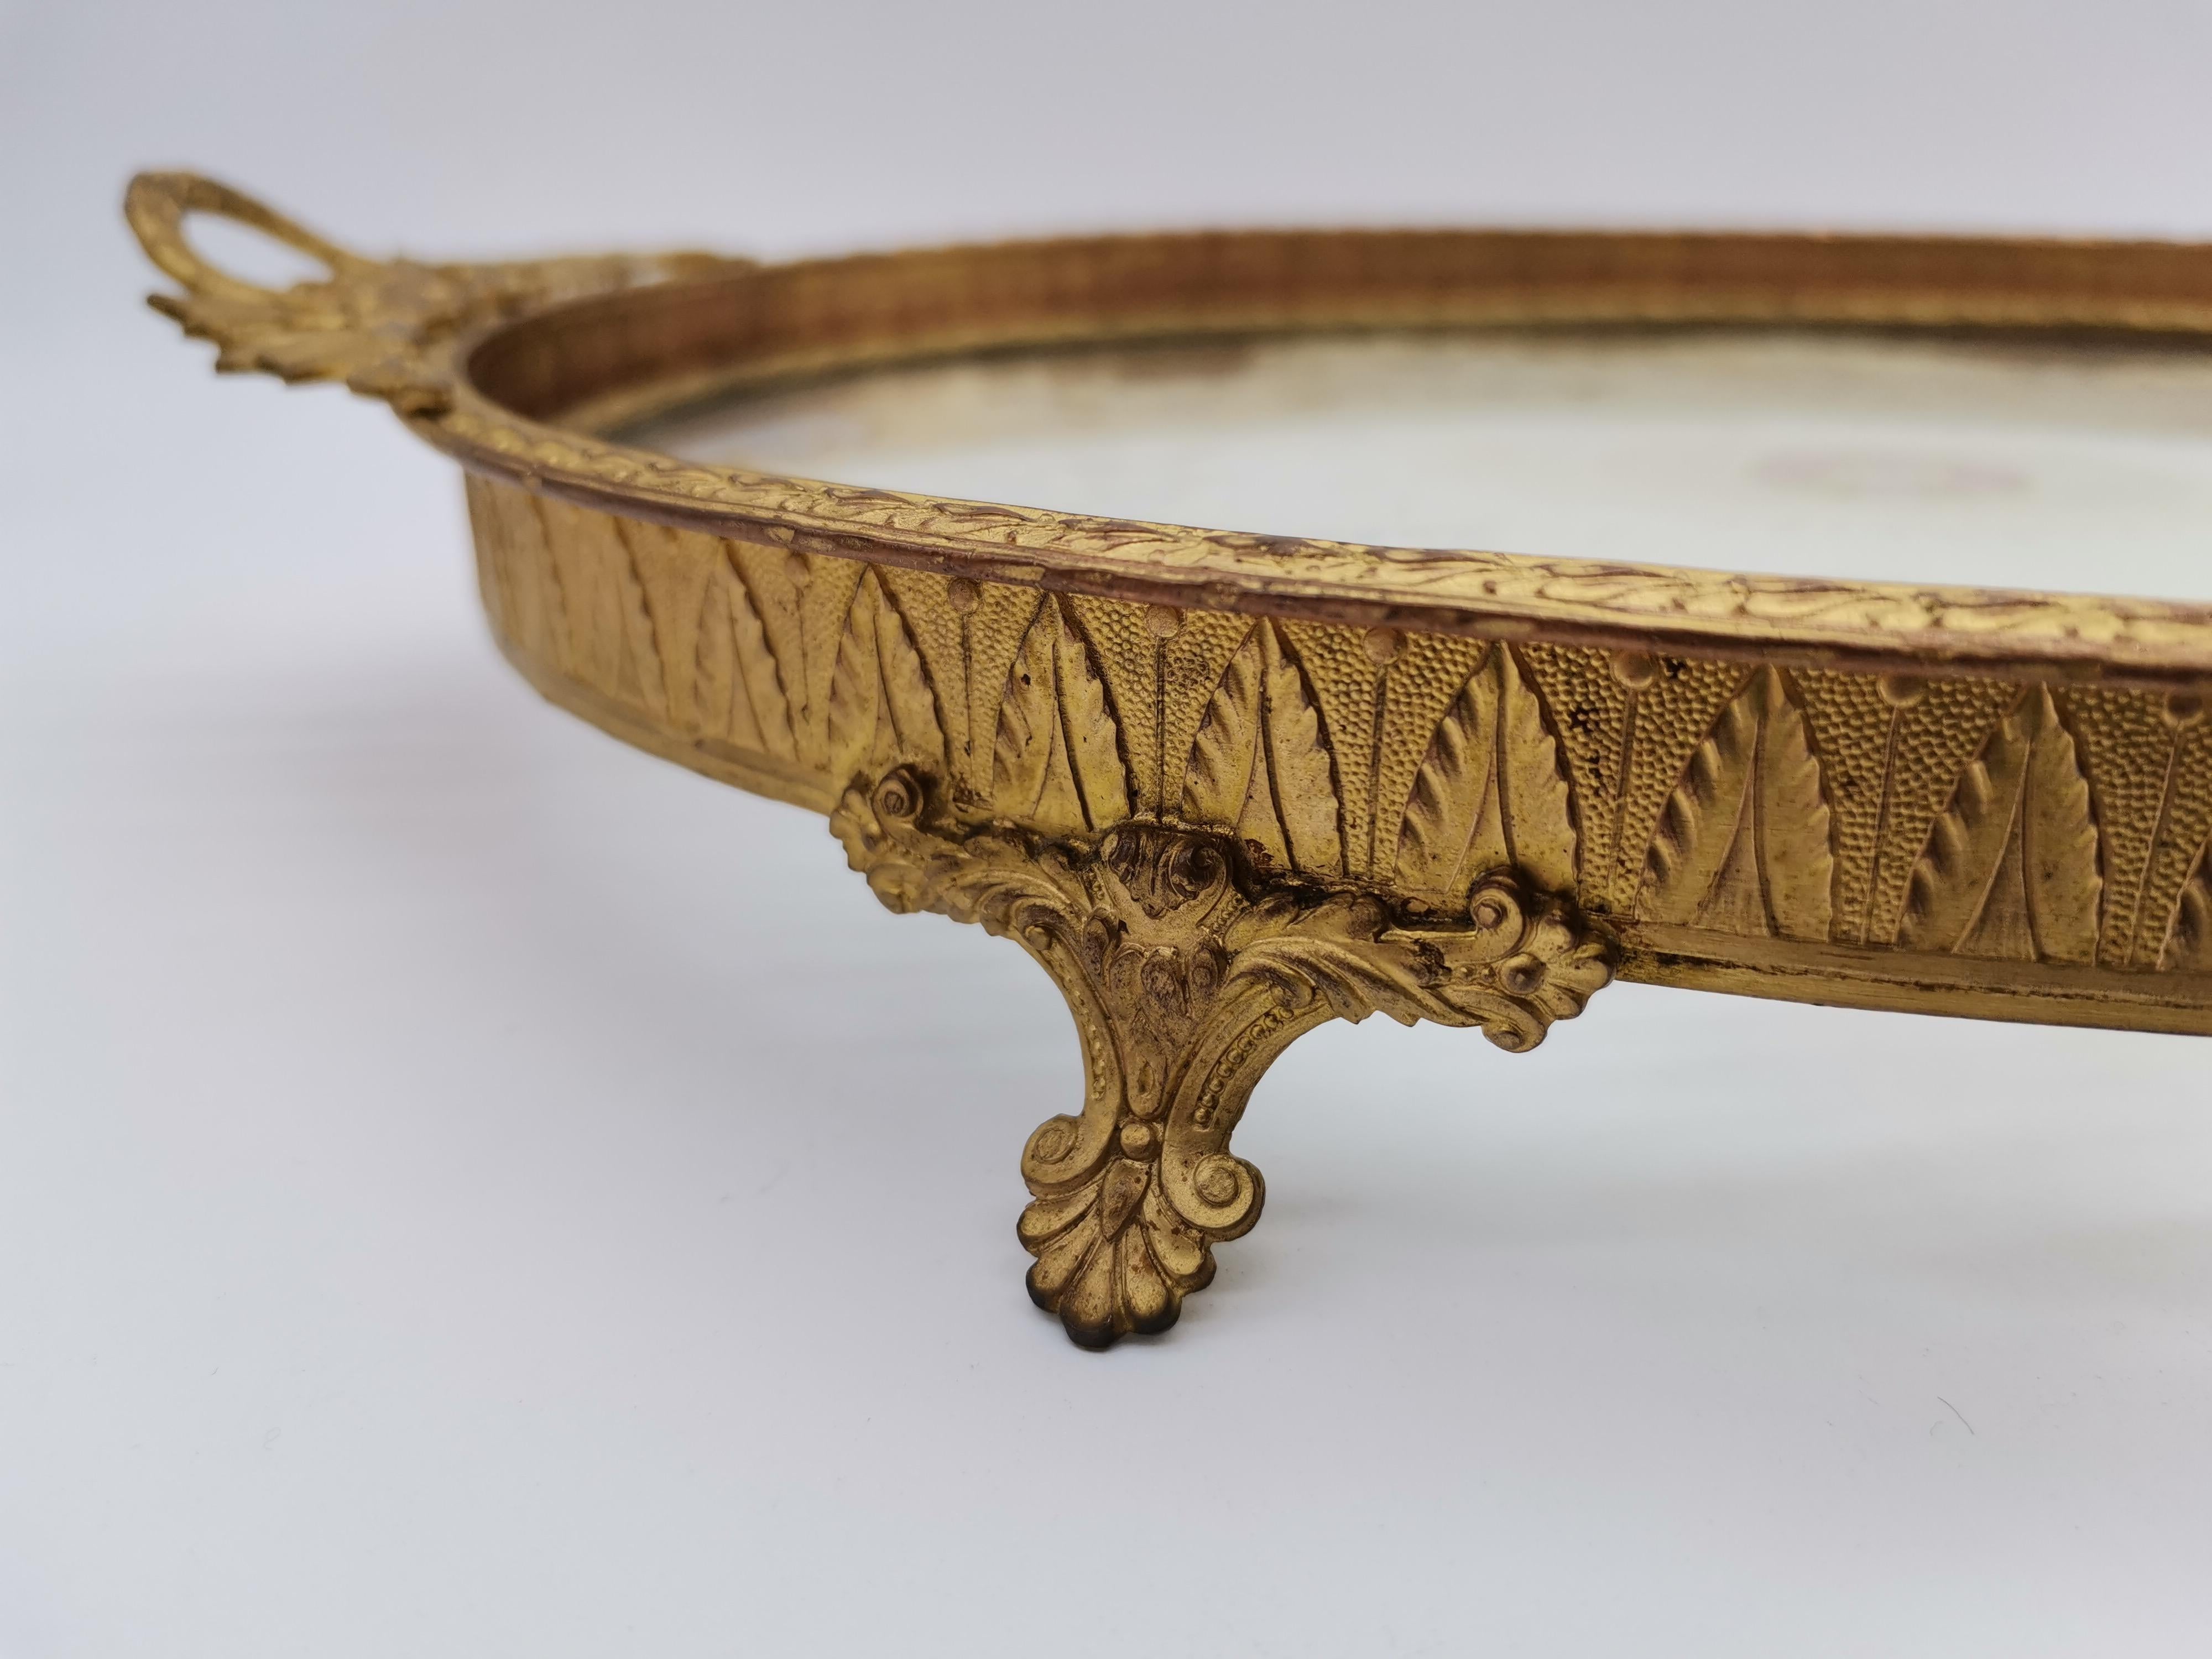 A serving tray made of brass and glass with a embroidery.